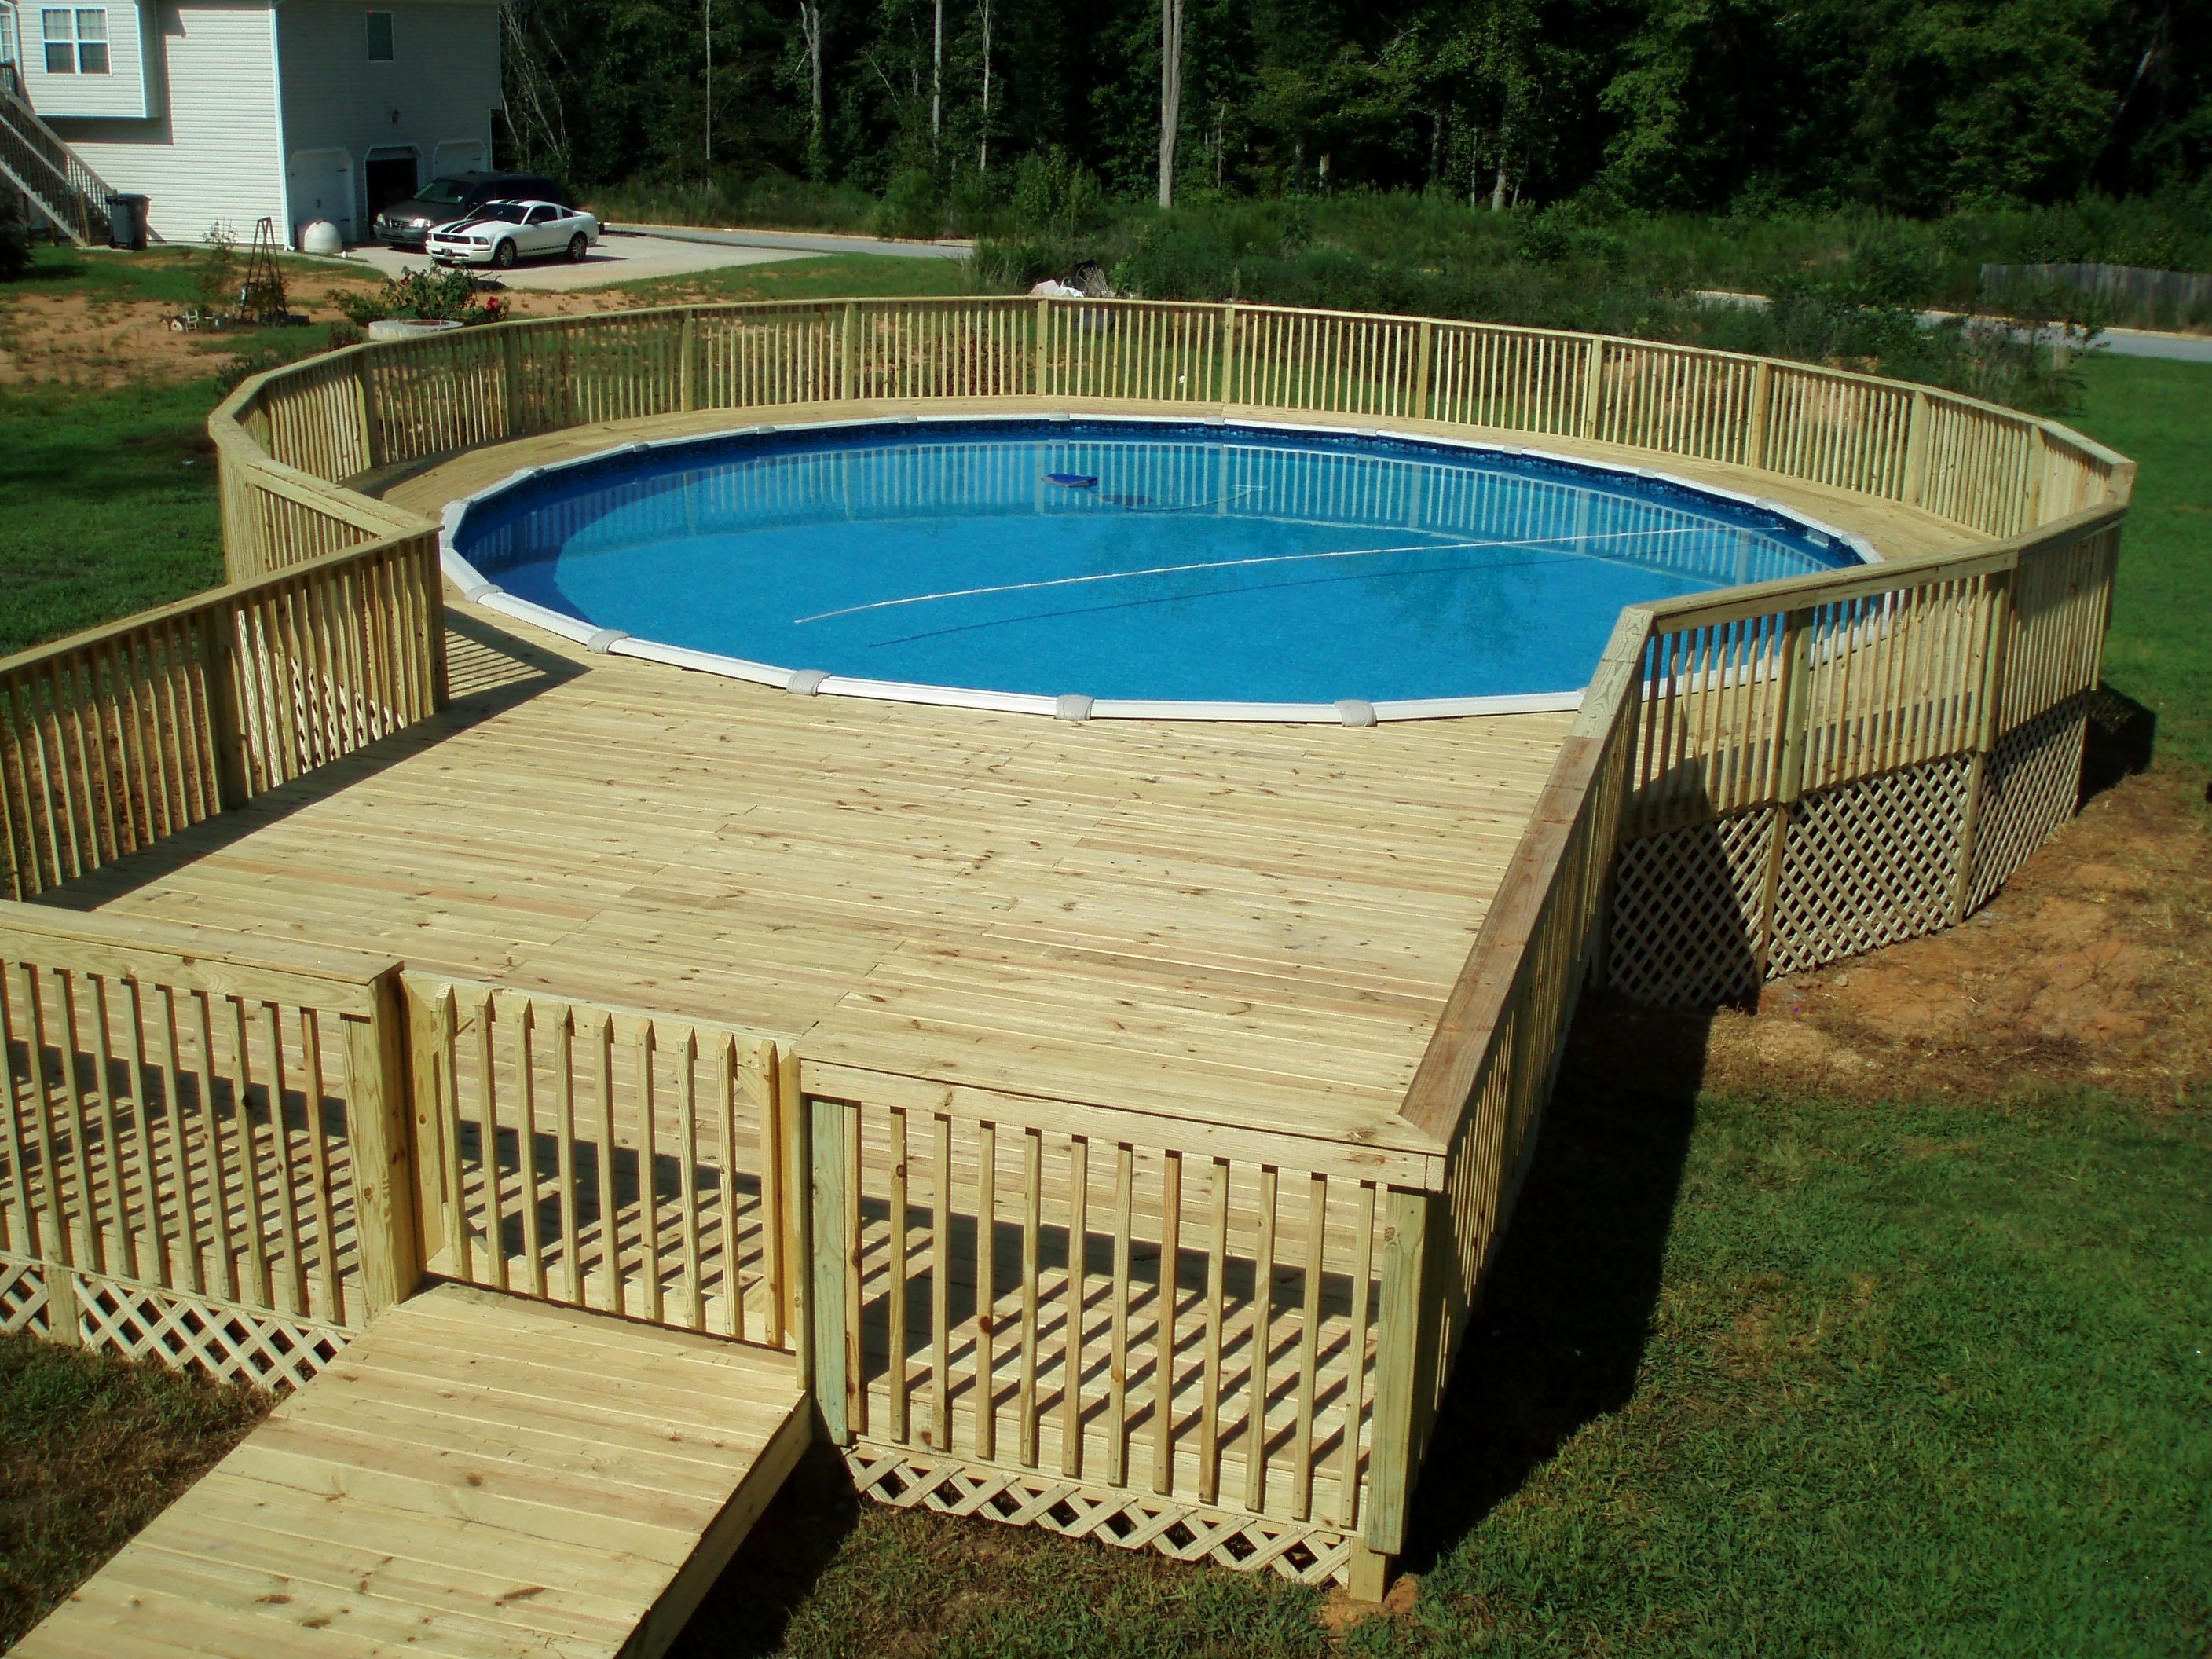 10 Unique Above Ground Pool Fencing Ideas above ground pool fence ideas pools home design and interior within 2022